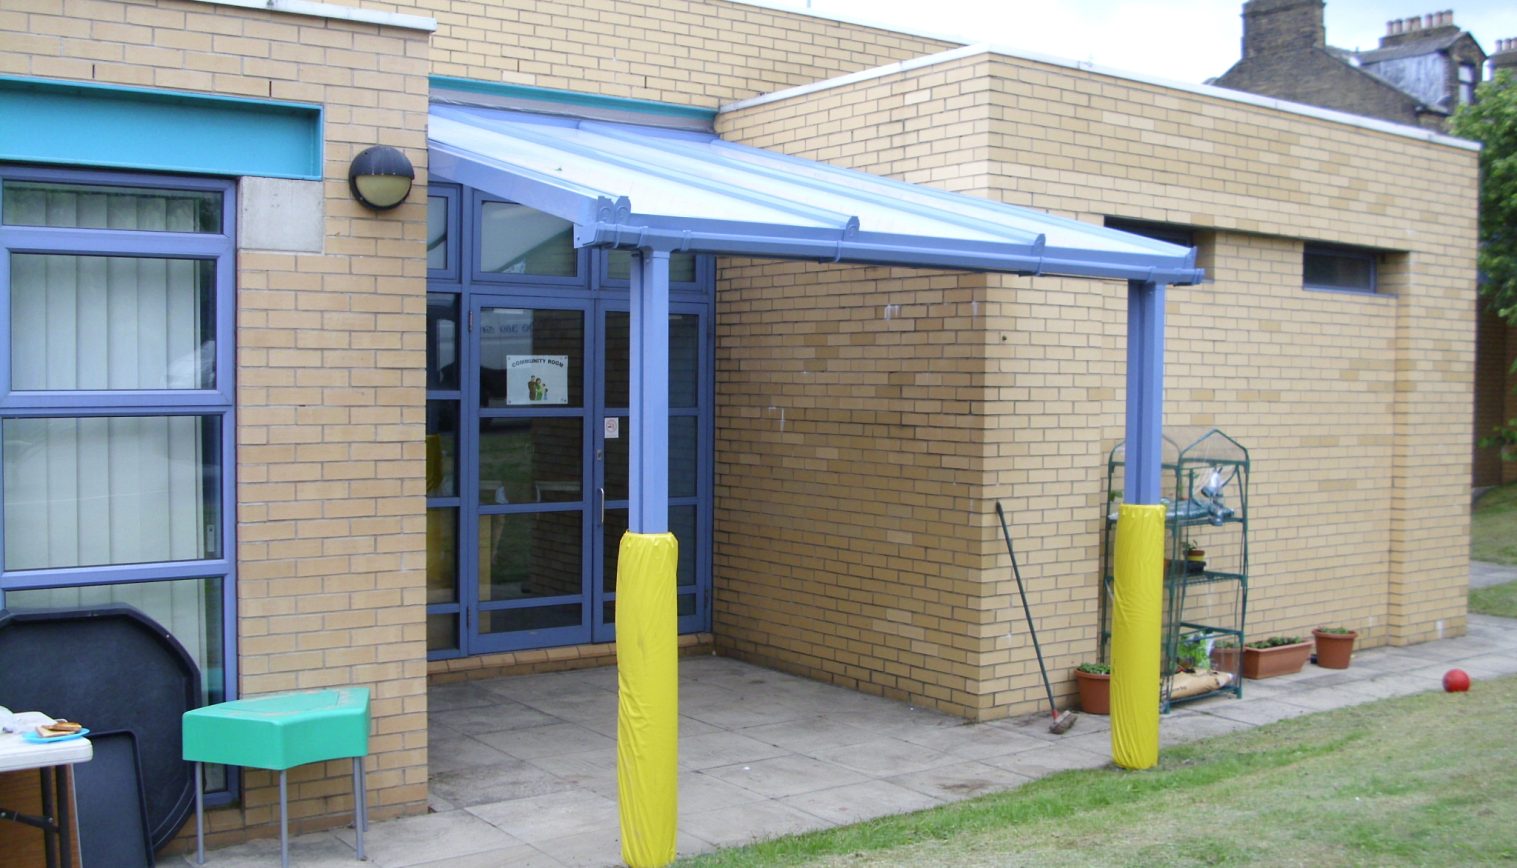 Killinghall Primary School – Wall Mounted Canopy